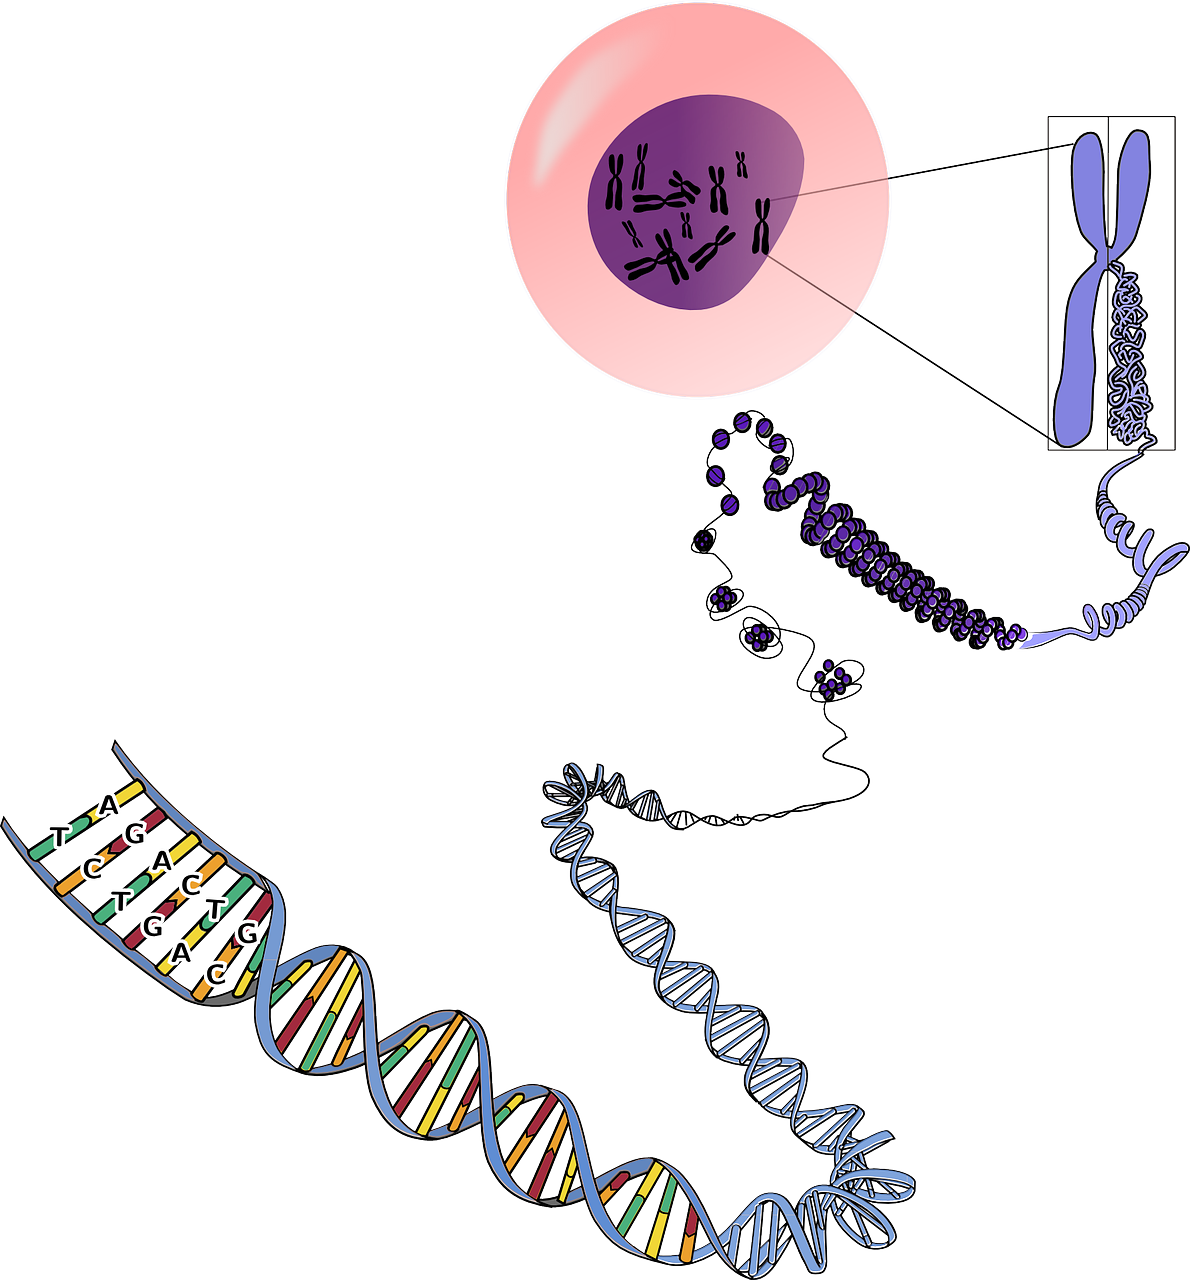 Diagram shows the forms that DNA takes, as a double helix, which will coil around itself, which will ultimately form a chromosome.